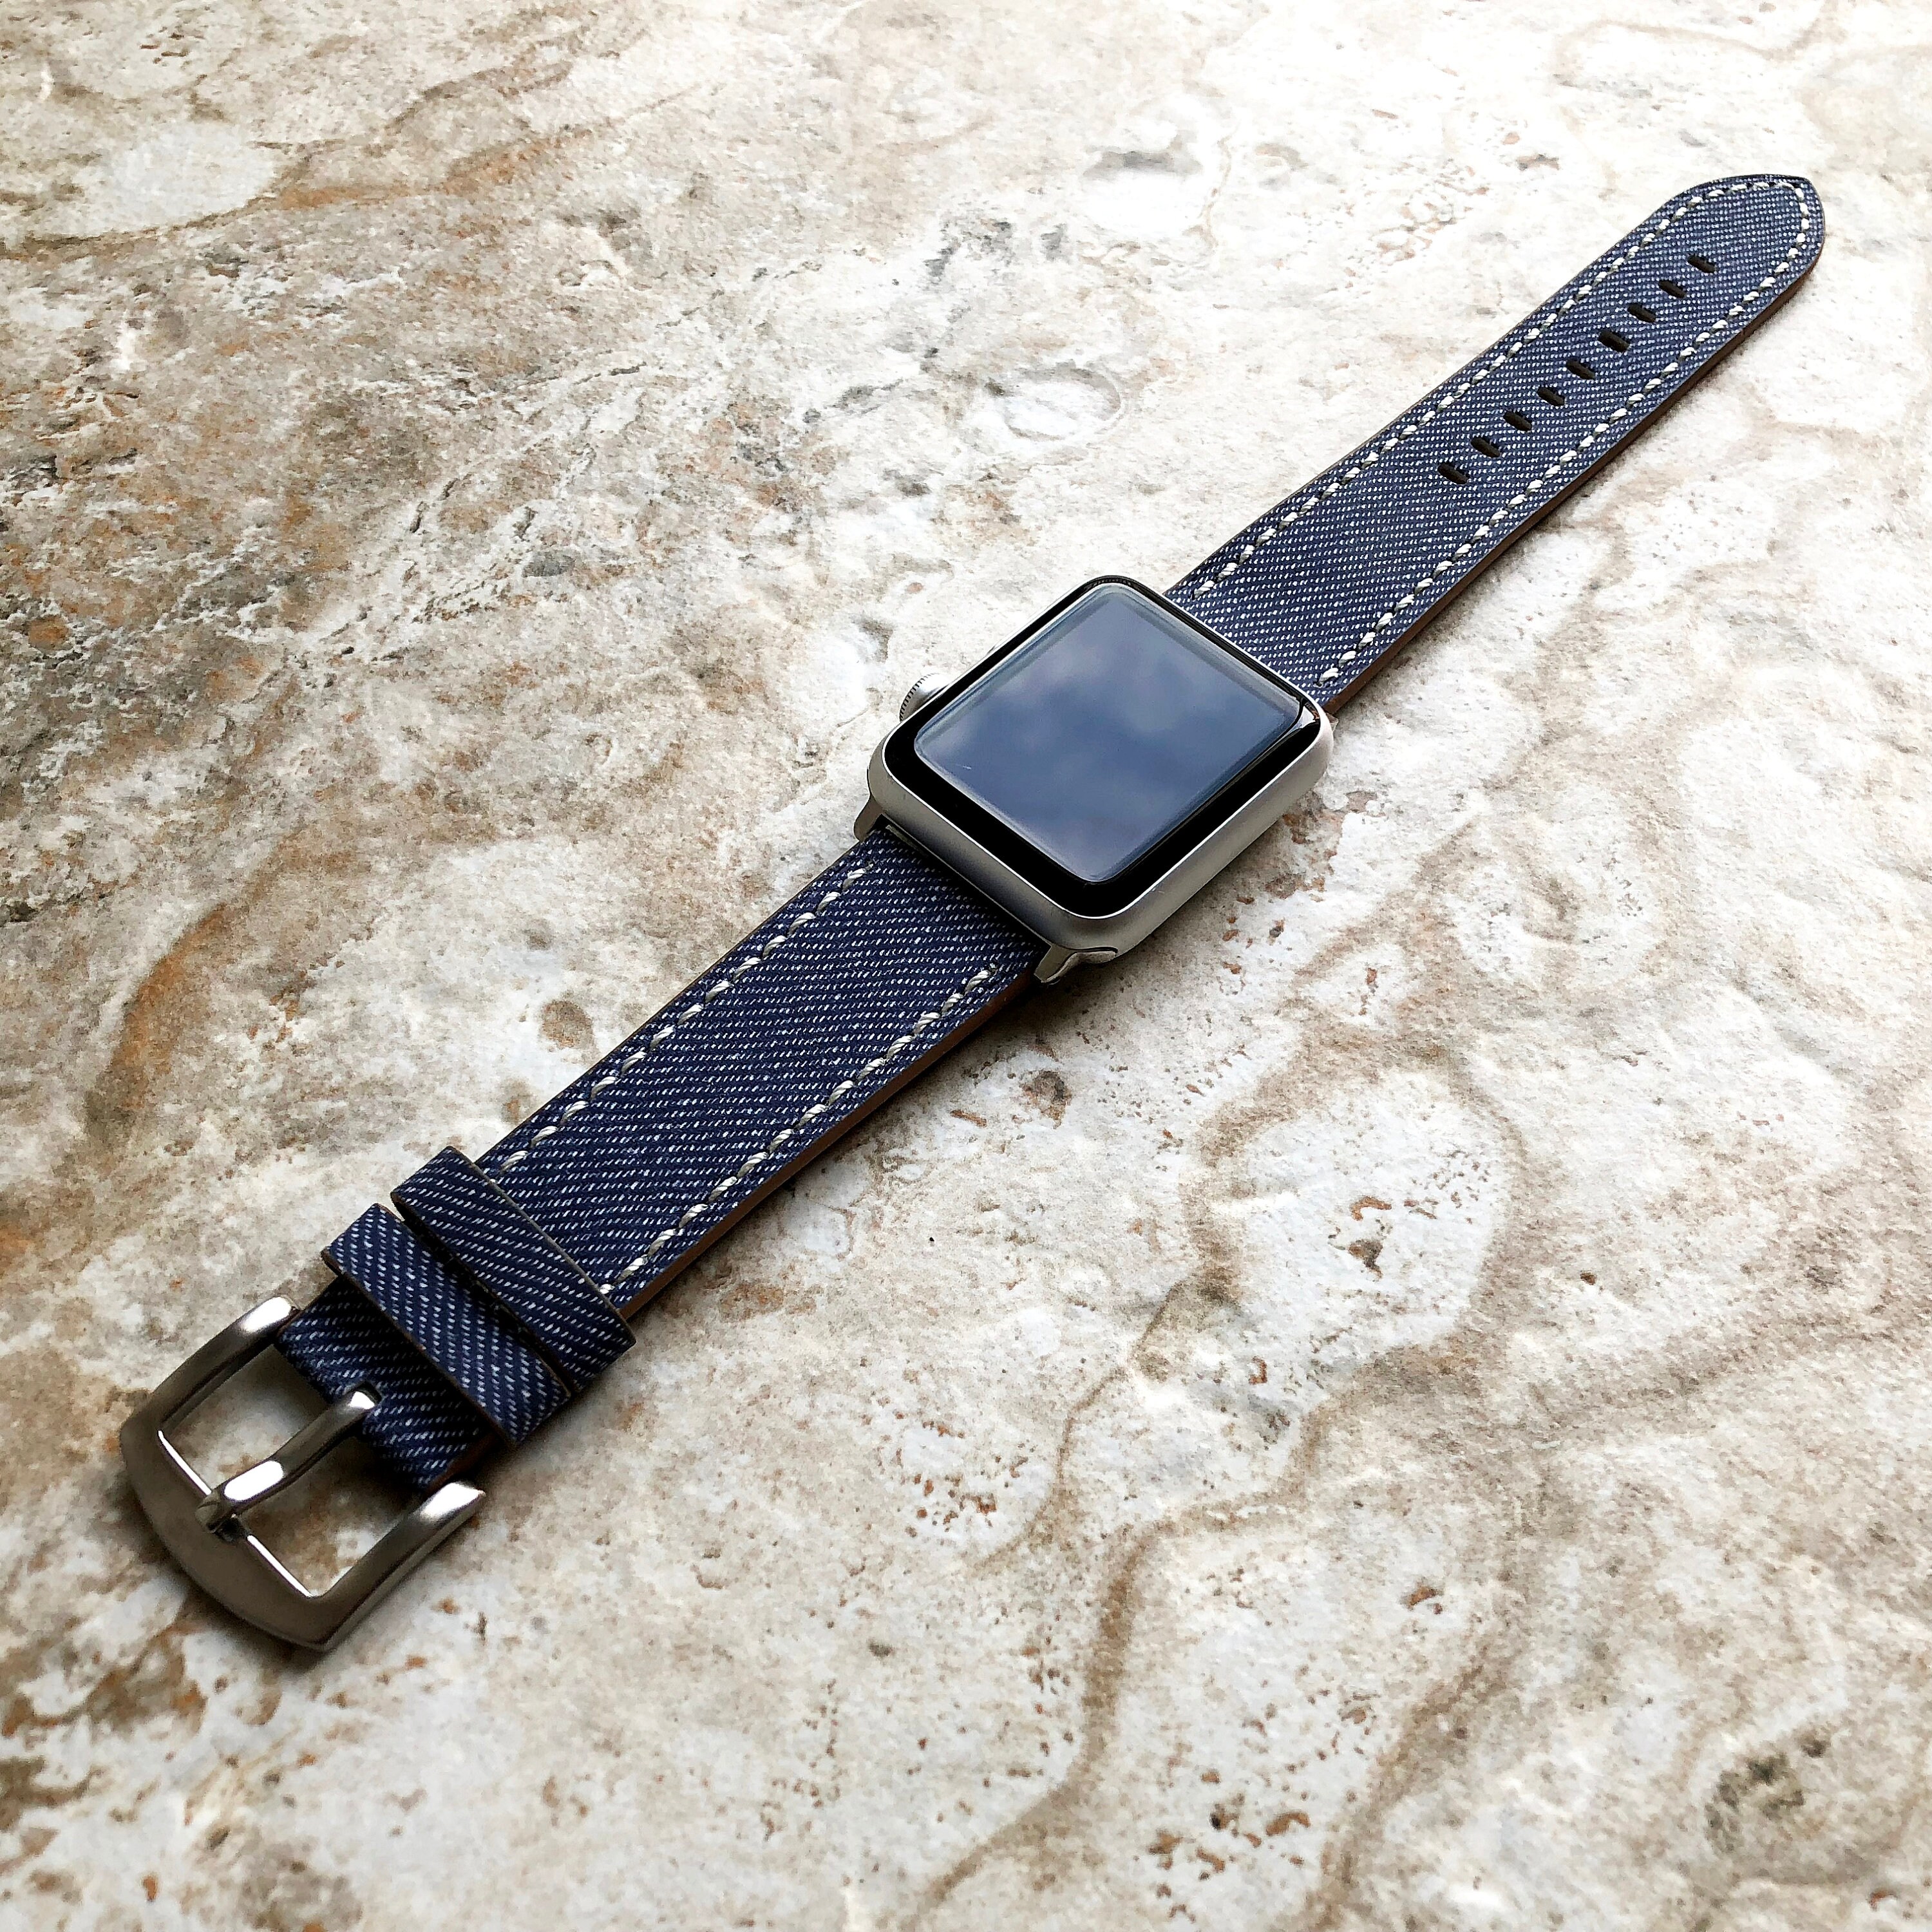 - Buy Print Case 49mm Jeans 45mm Coated Series 42mm Online Leather India for AP-JB3 Highly 44mm All 40mm Band Etsy Iwatch Apple Resistance in Strap Soft 41mm 38mm